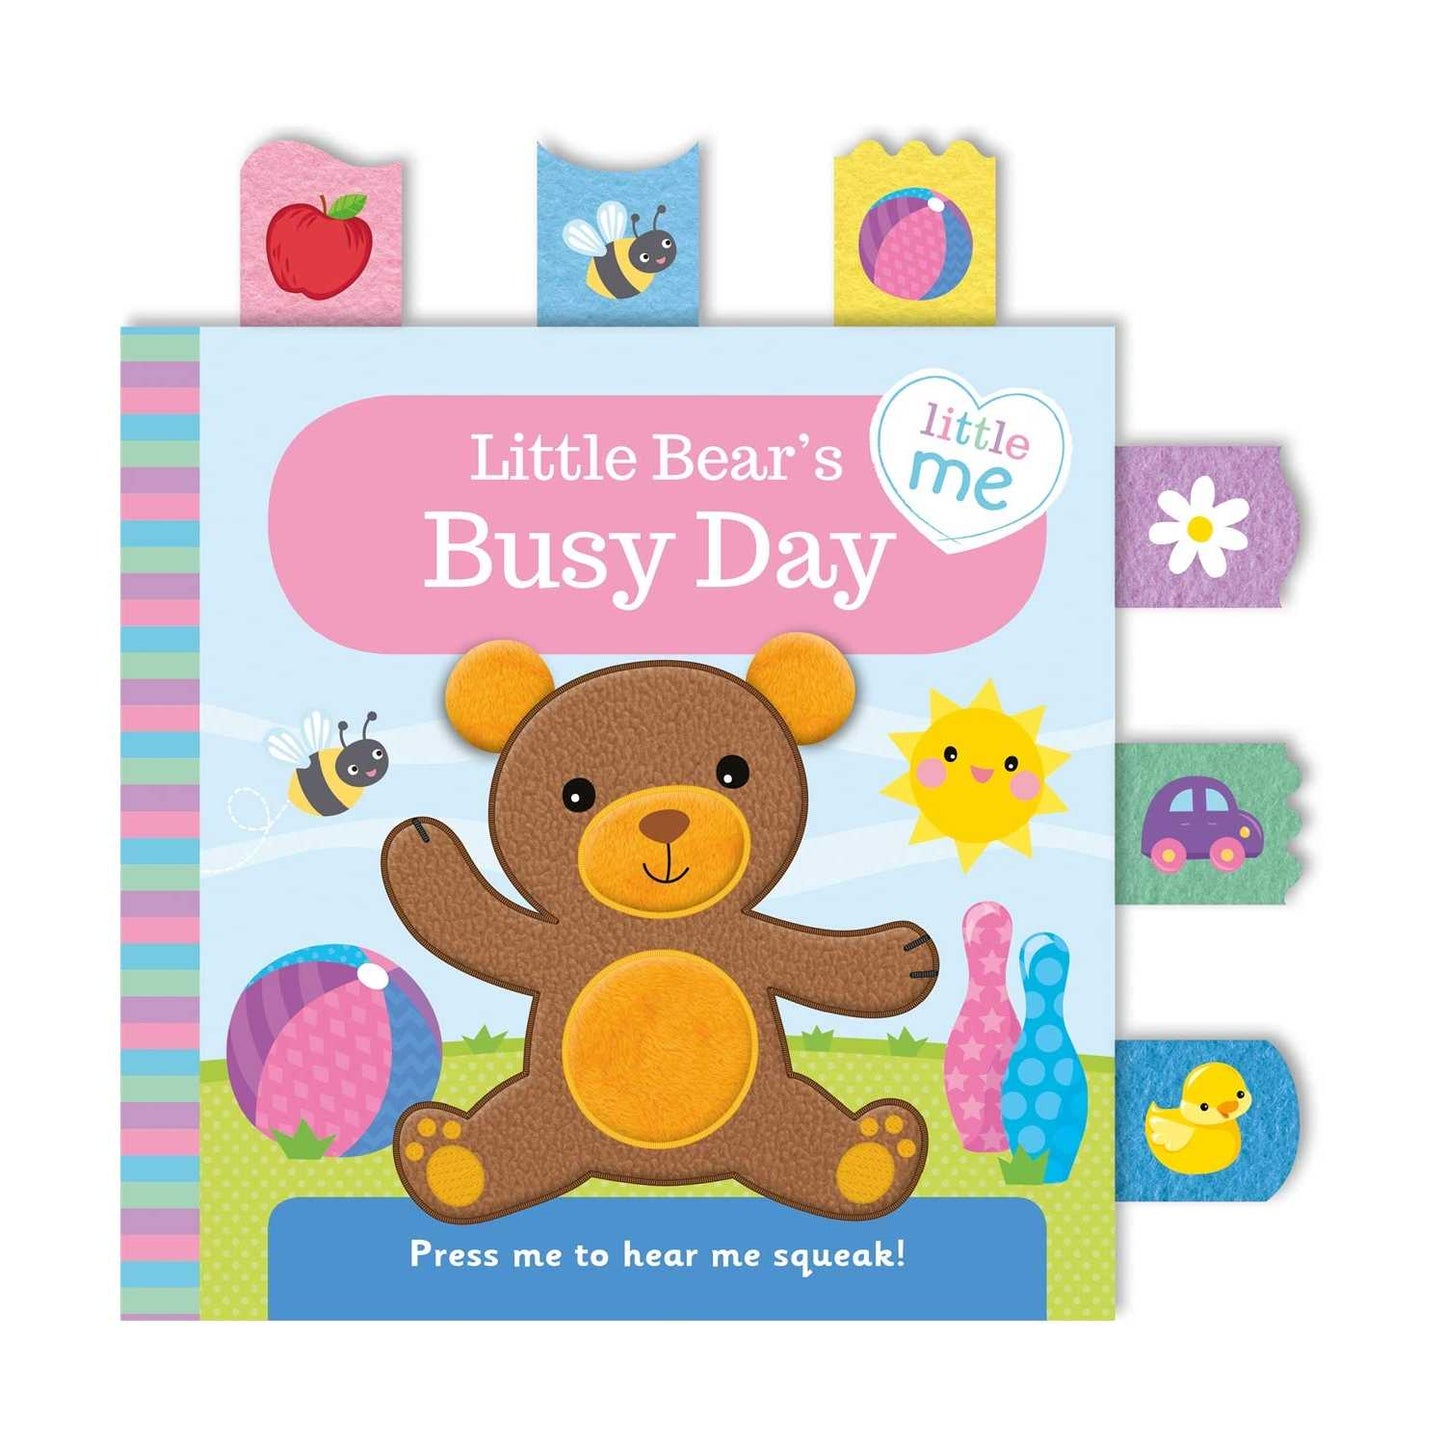 Little Bear's Busy Day (Little Me - Cloth Book) Igloo